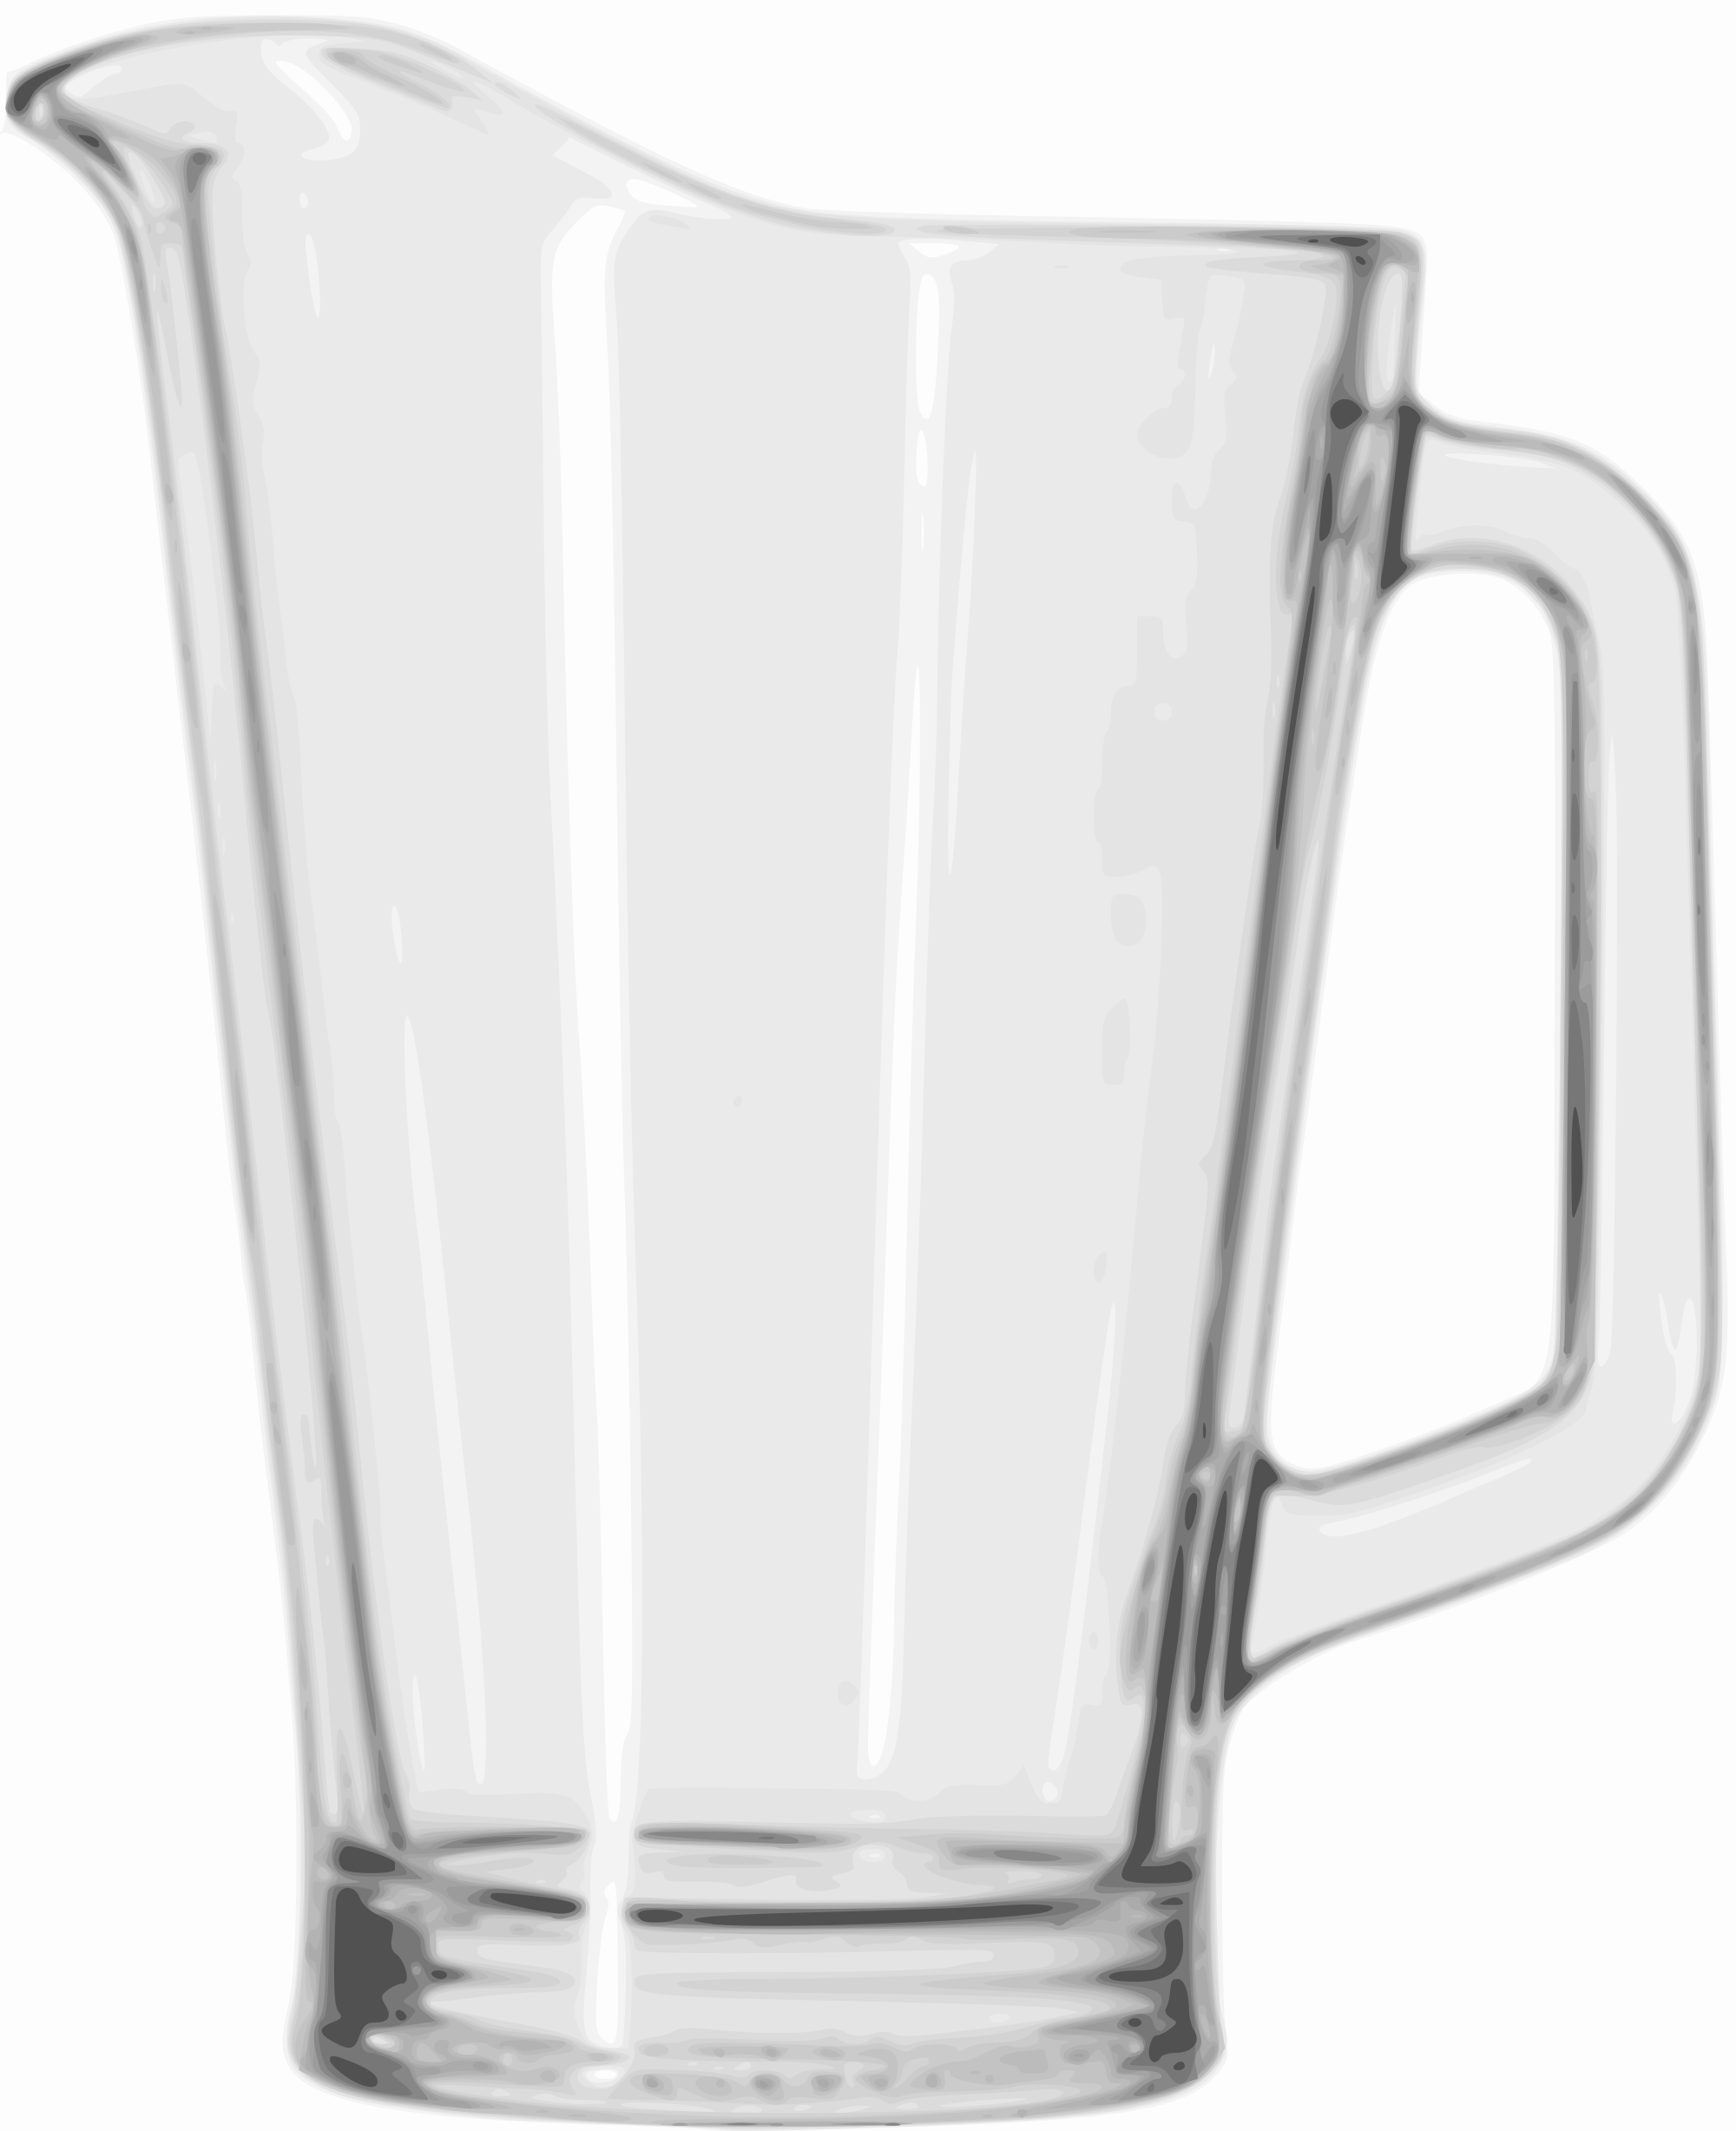 Pitcher svg #16, Download drawings